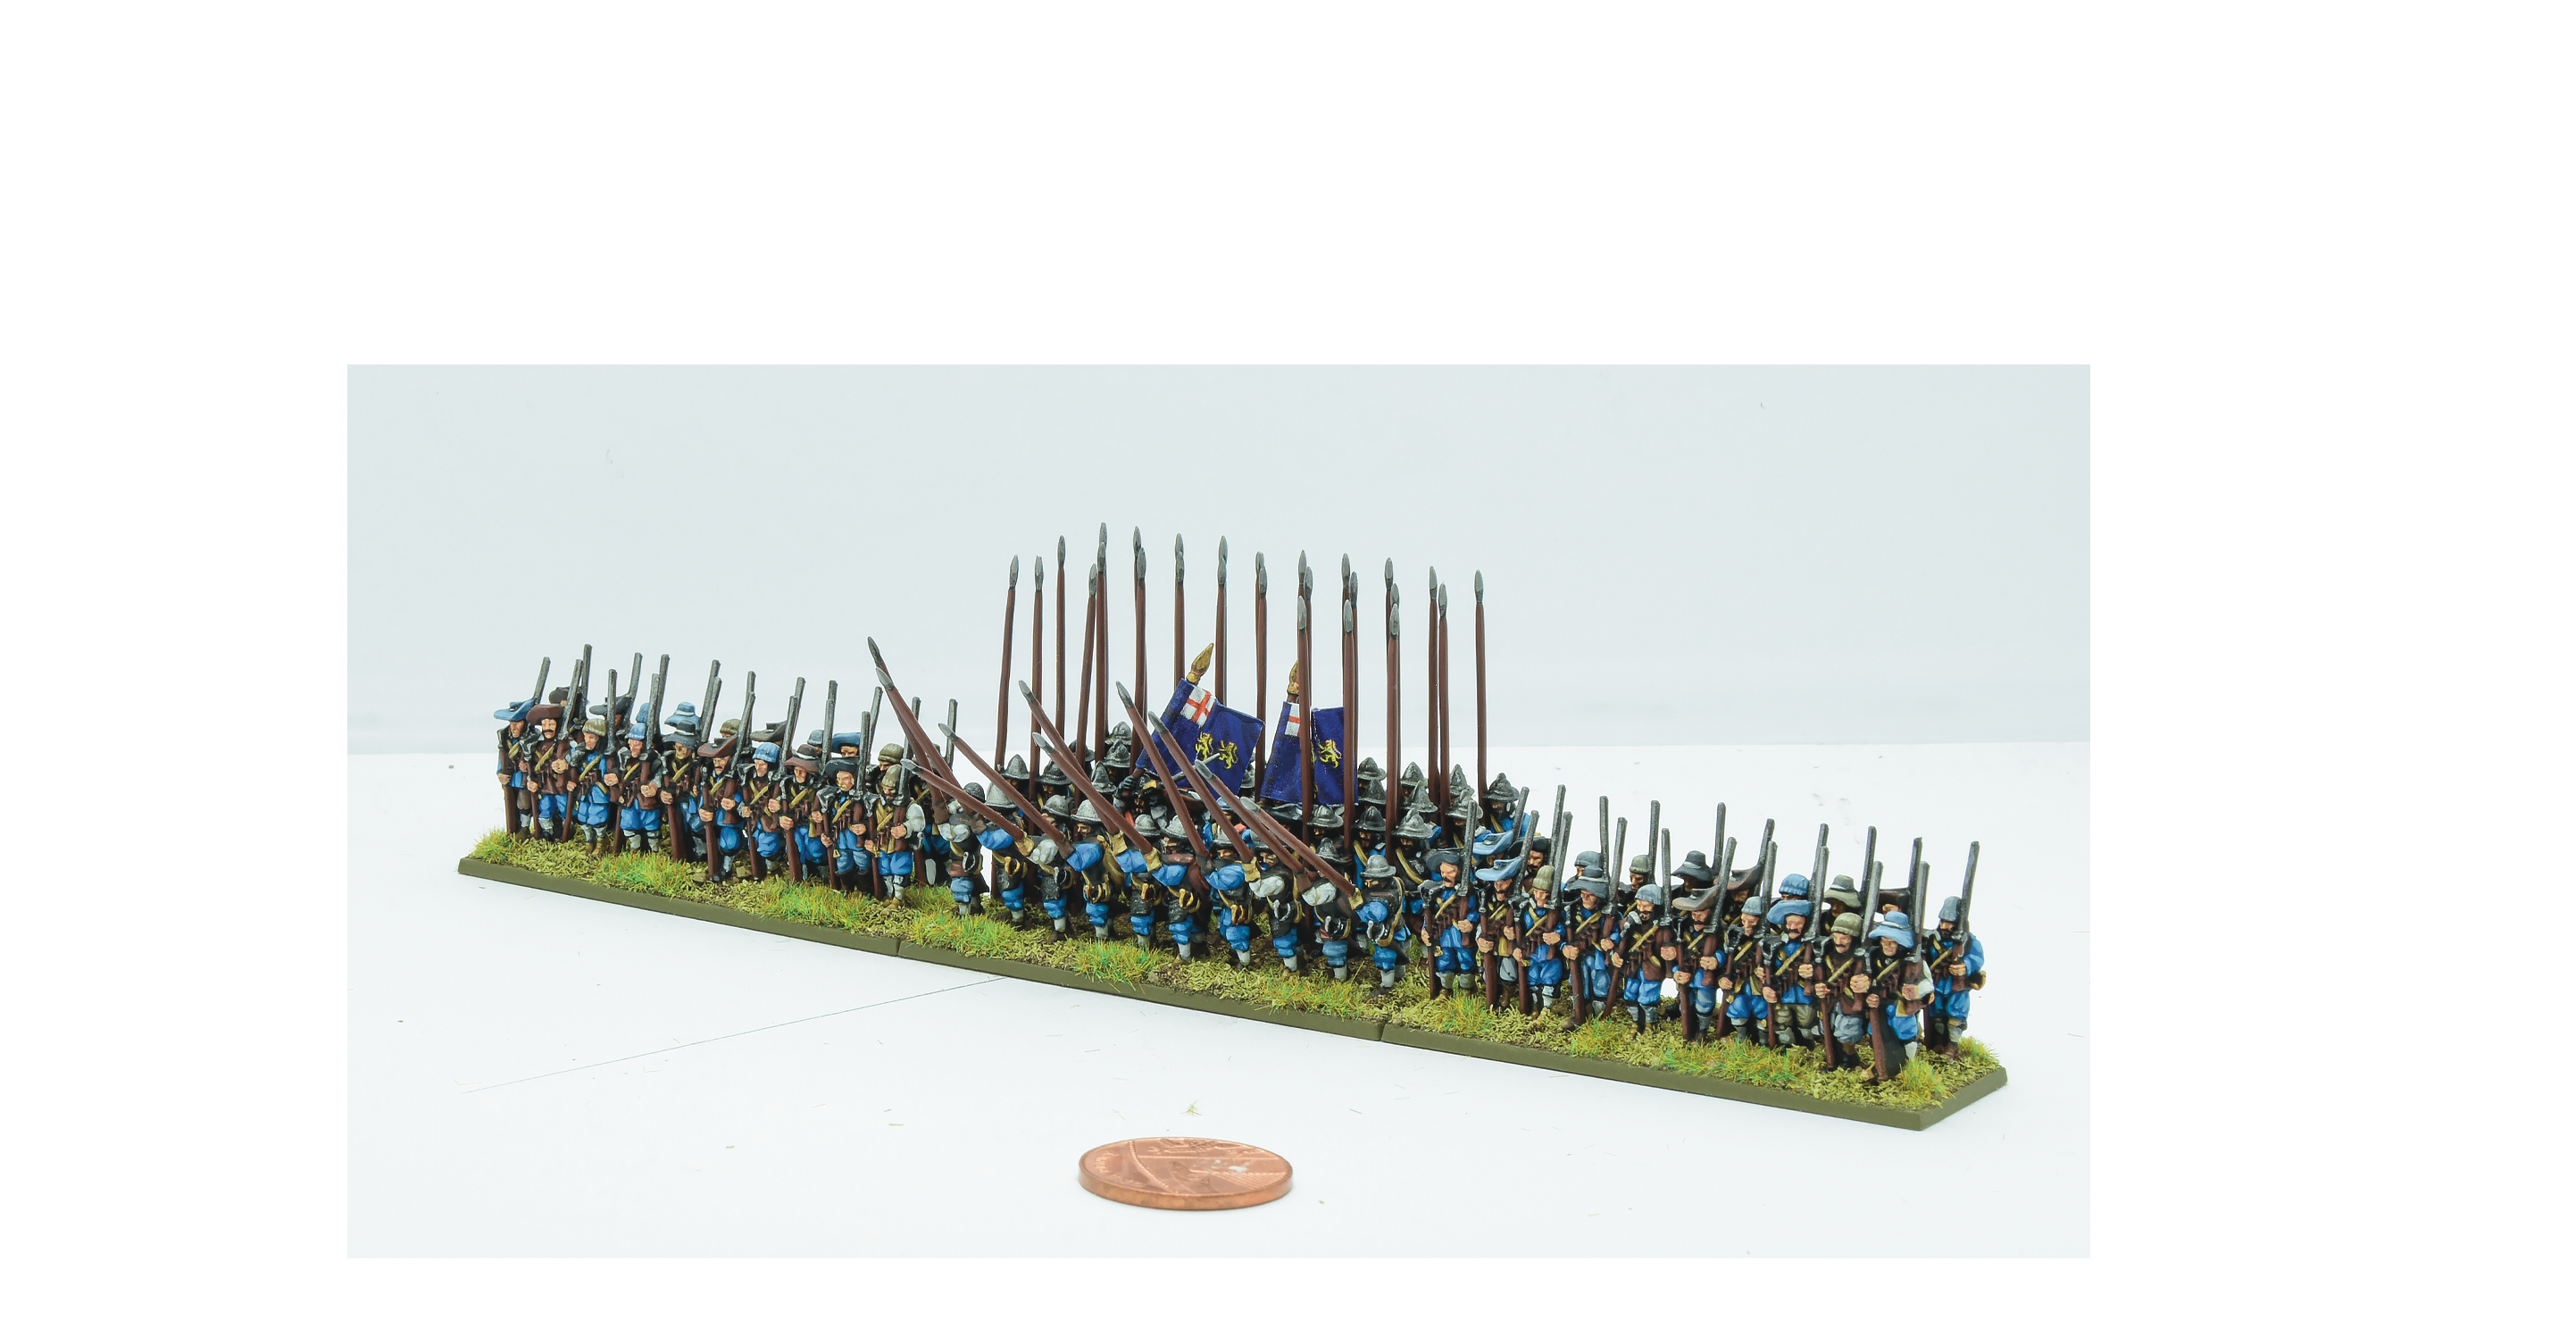 Painting: ECW Armies The Army Painter Way! - Warlord Games